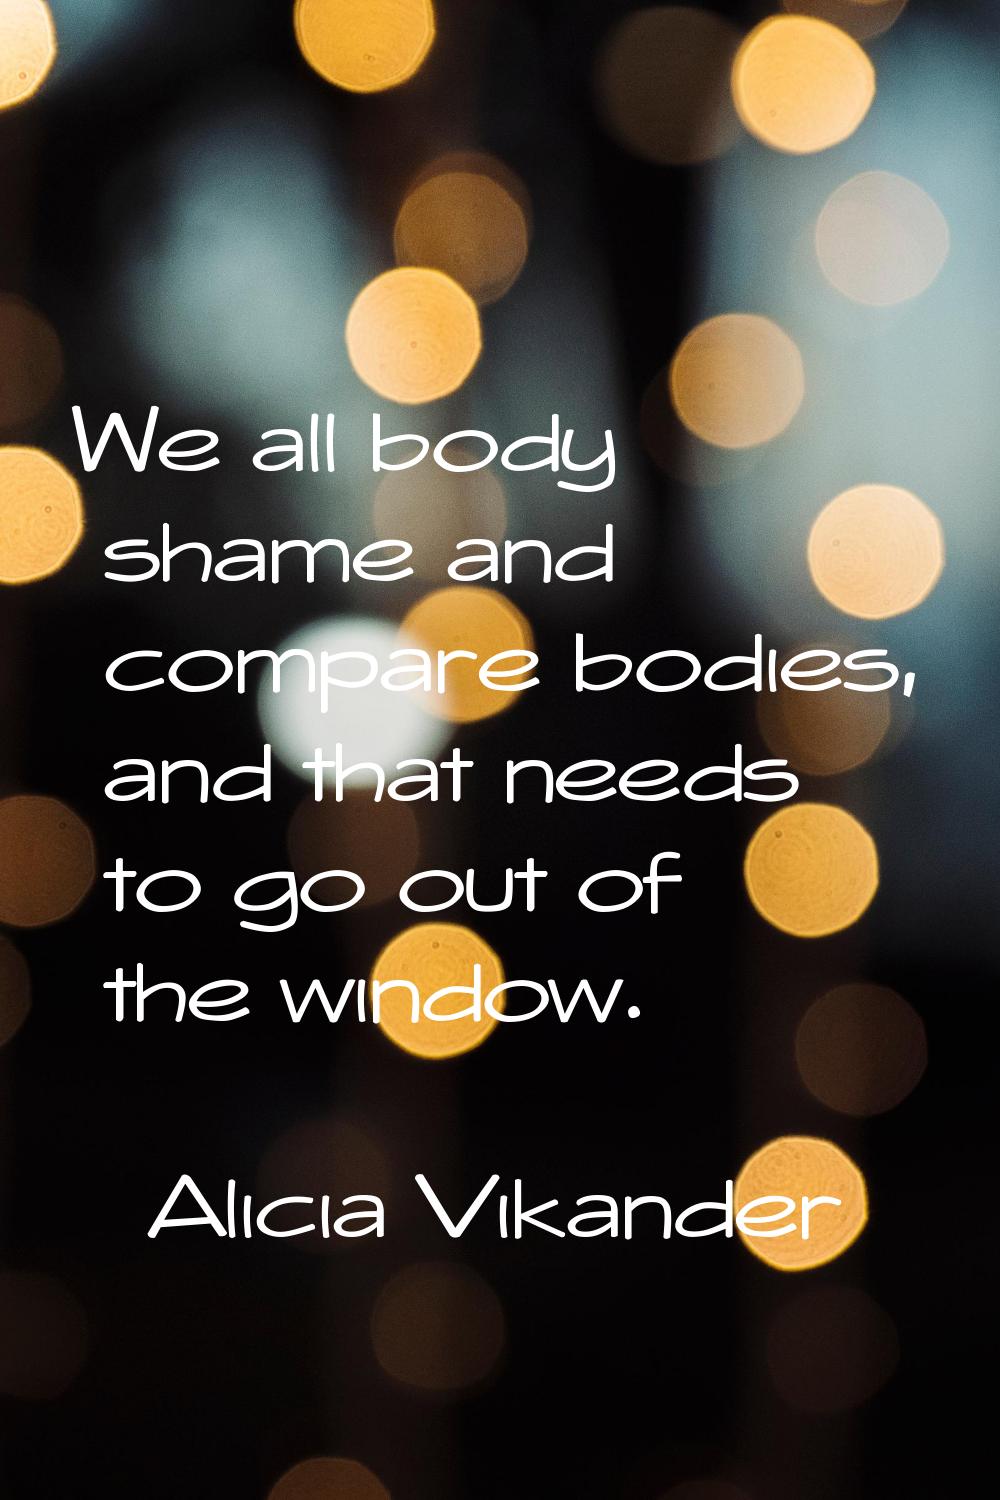 We all body shame and compare bodies, and that needs to go out of the window.